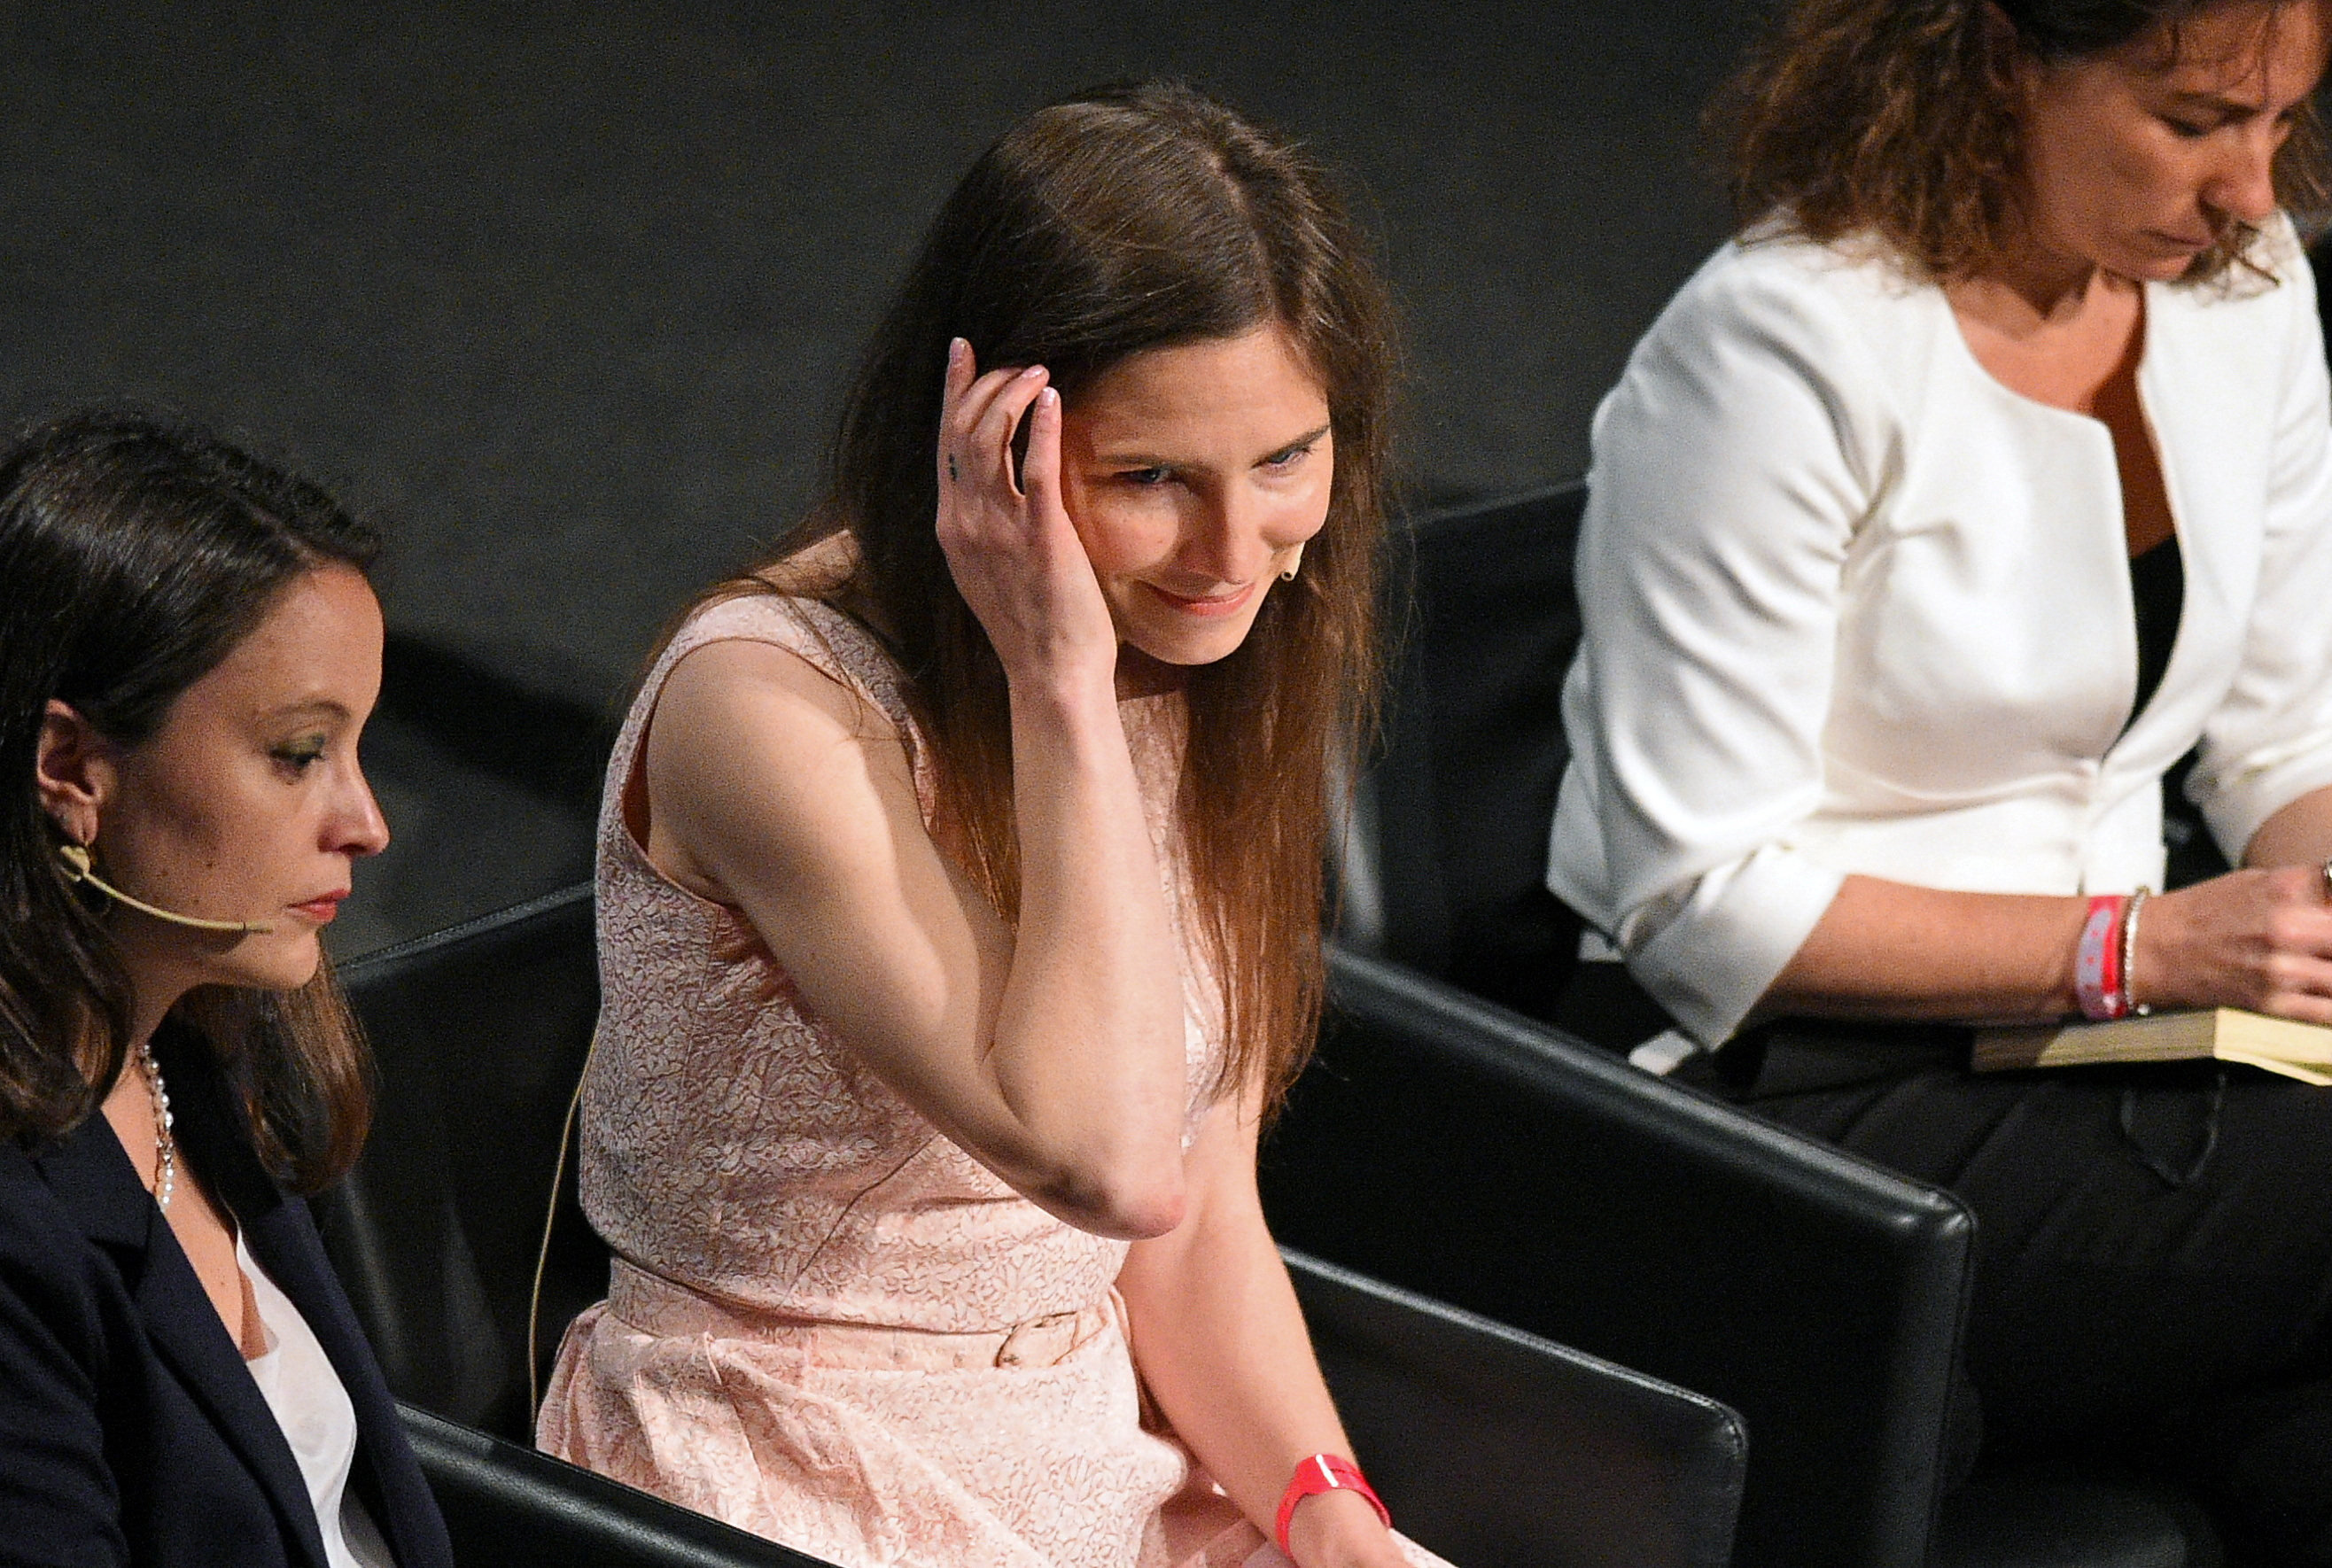 Amanda Knox, who has returned to Italy for the first time since being cleared of the murder of British student Meredith Kercher, attends the Criminal Justice Festival in Modena